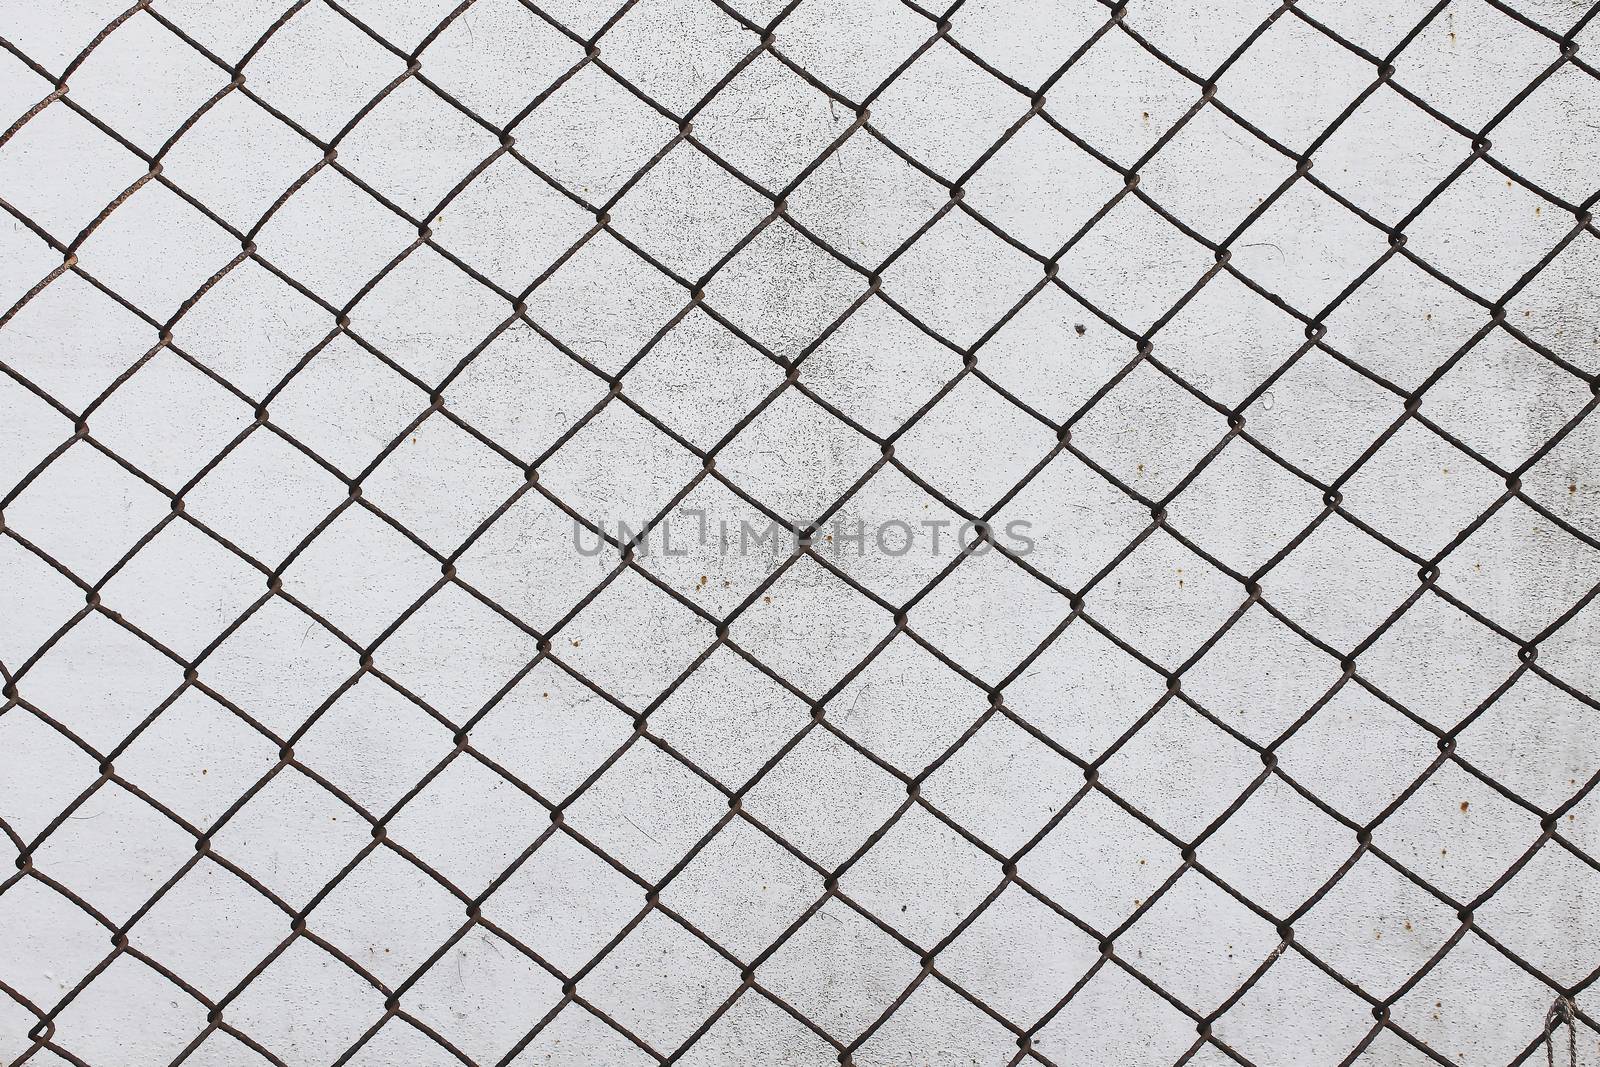 grid cell background old rusty metal mesh wire